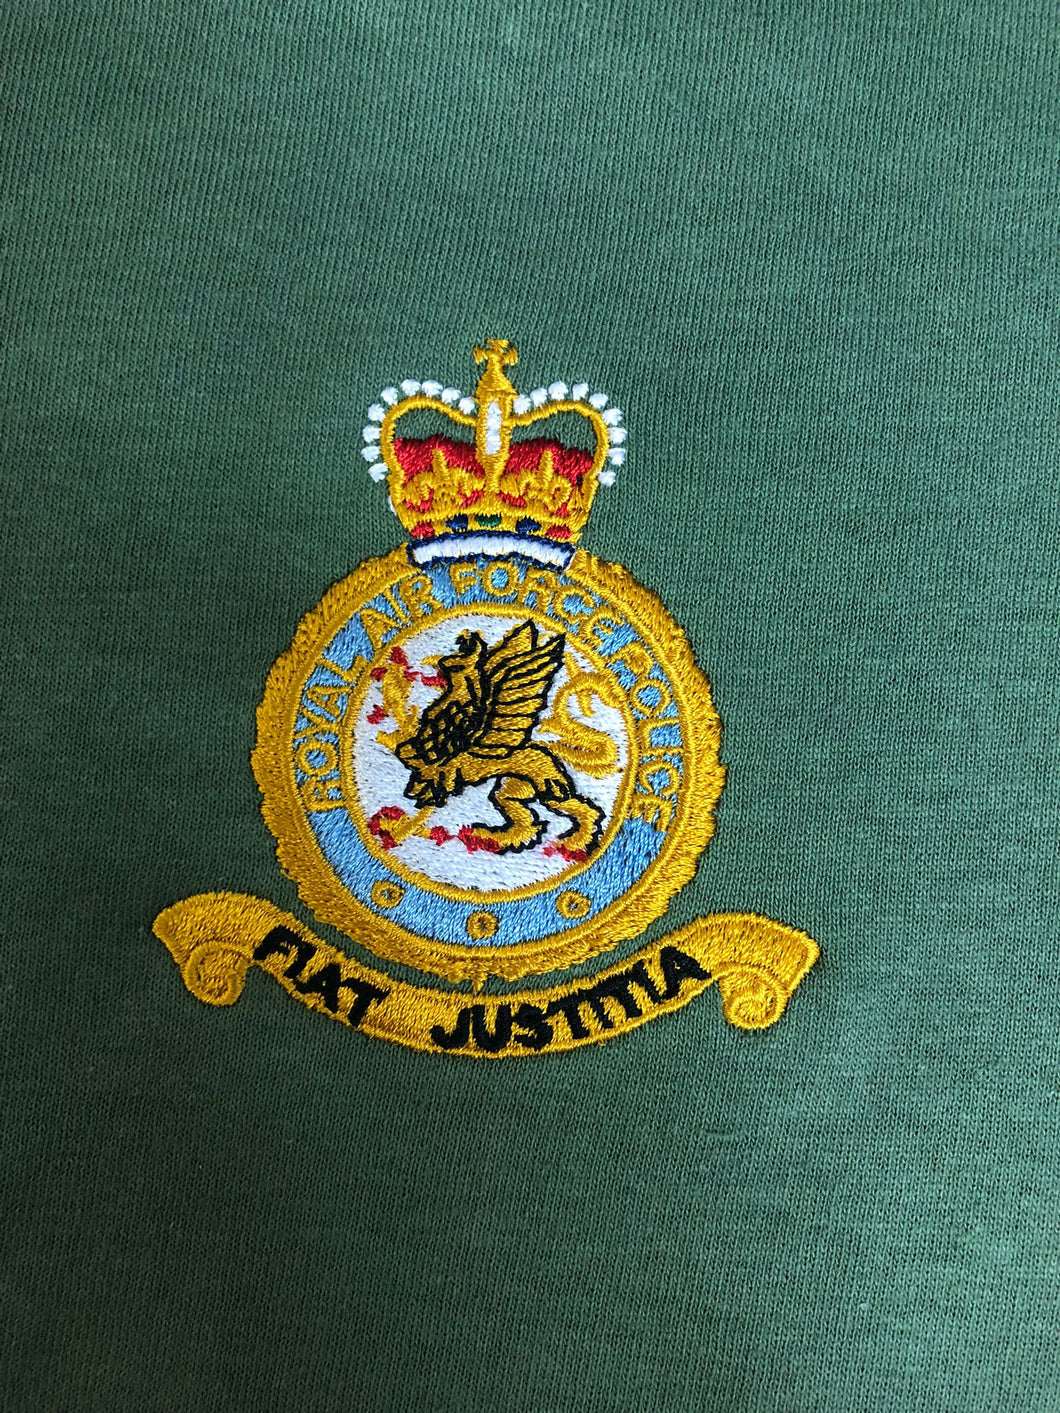 Embroidered Royal Air Force RAF Police Crest - Choose your Garment